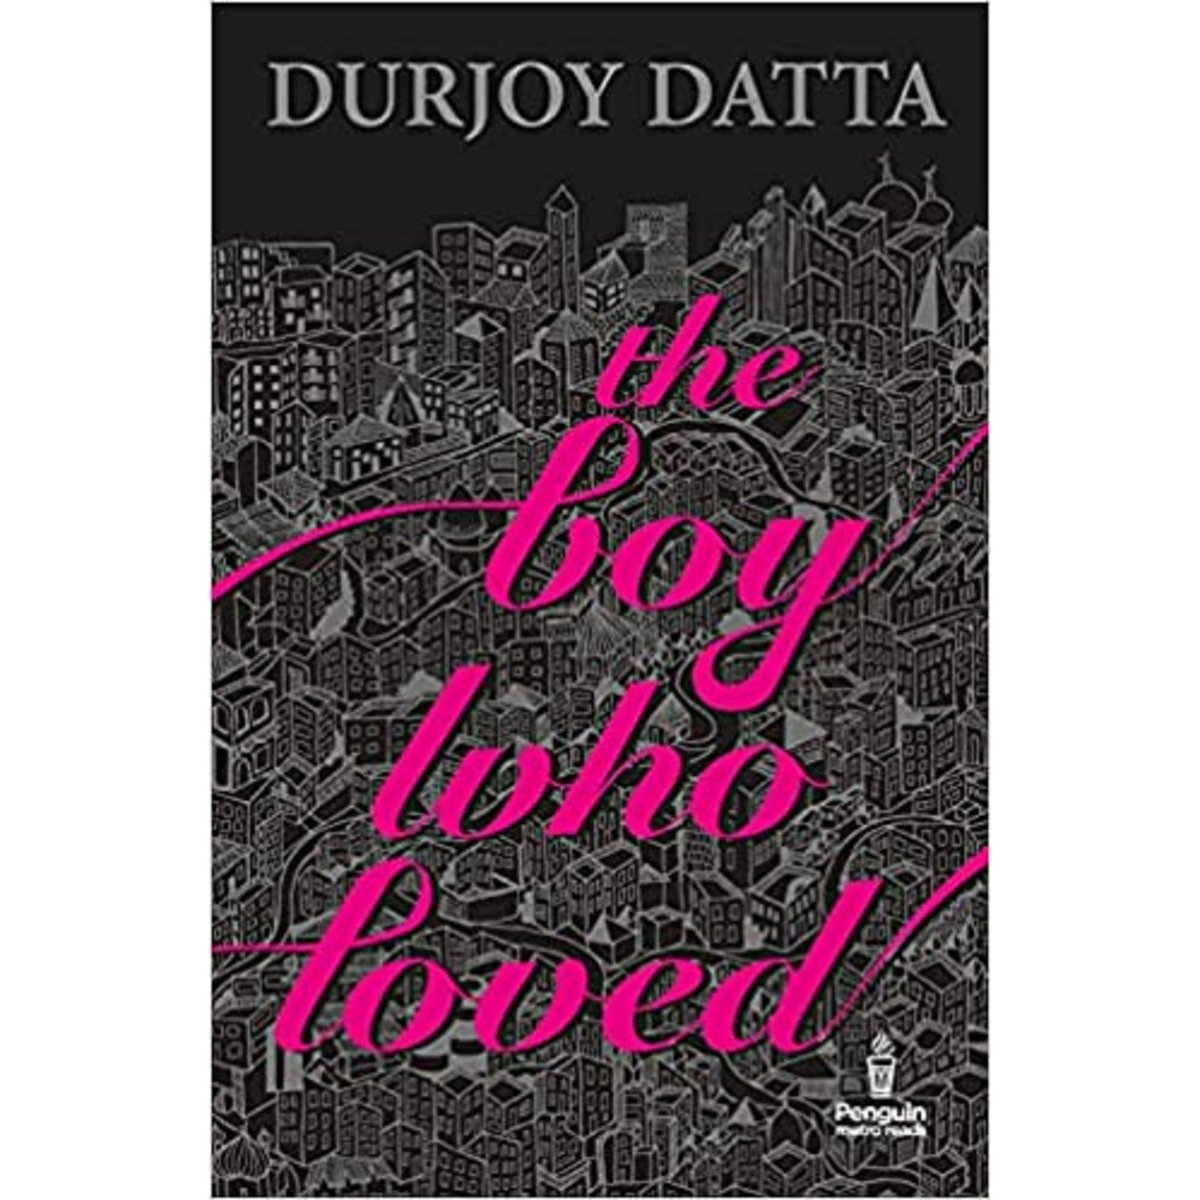 The Boy who loved